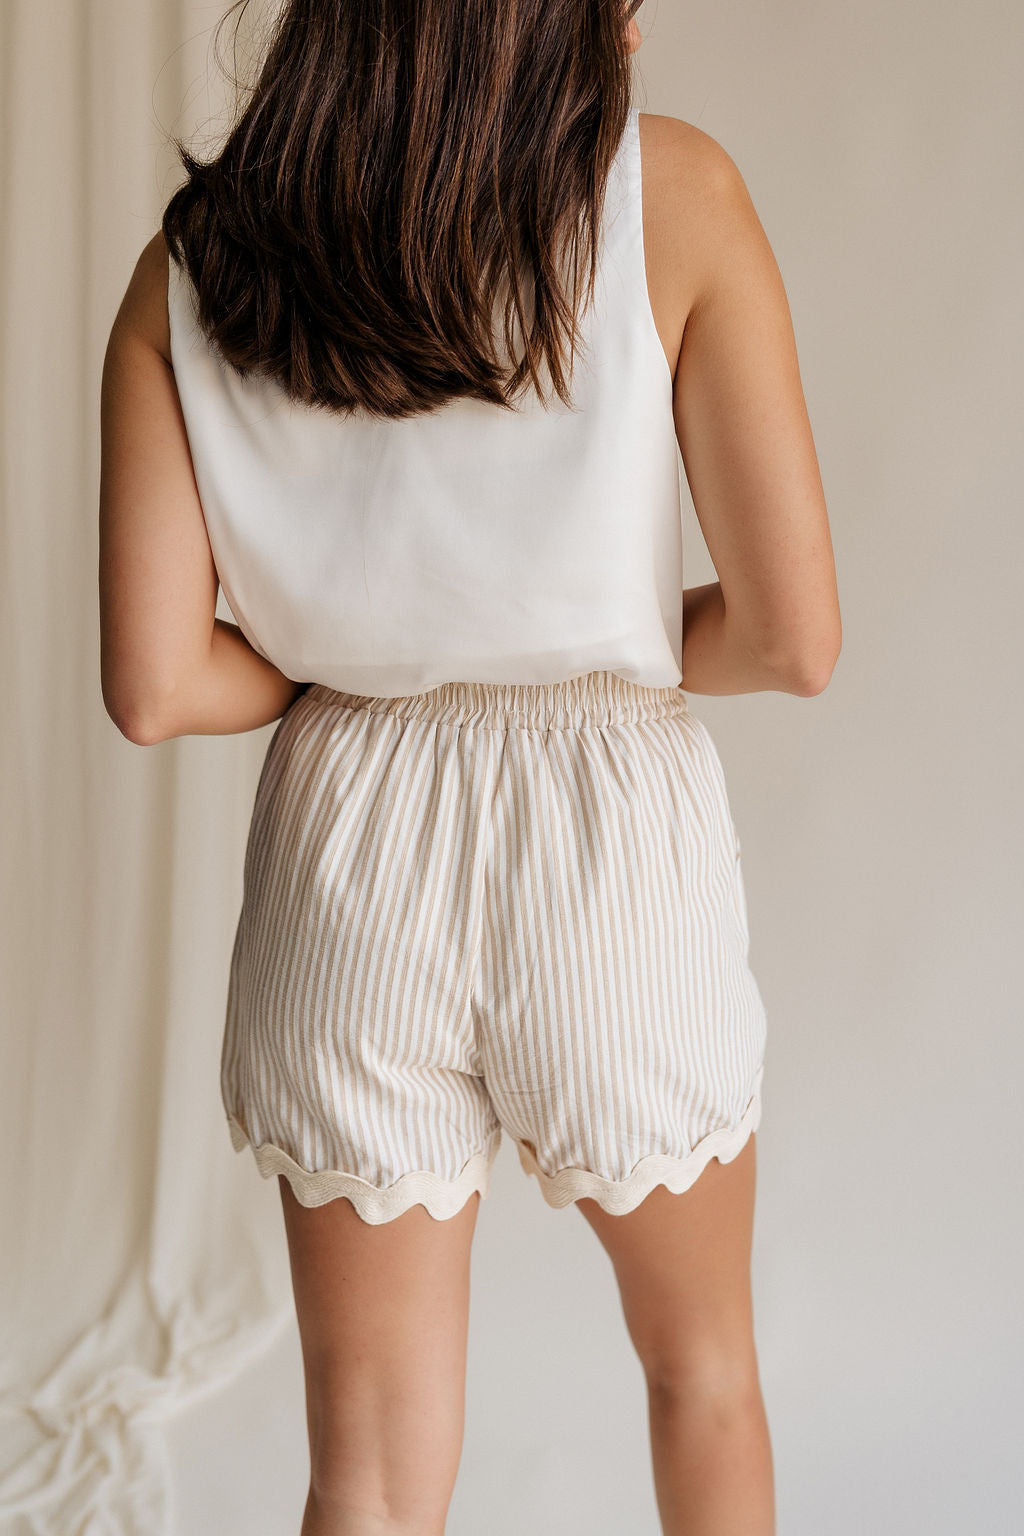 back view of female model wearing the Patricia Beige & Cream Stripe Scallop Hem Shorts which features Beige and White Stripe Print, White Lining, Scalloped Hem, Elastic Waistband and Side Pockets